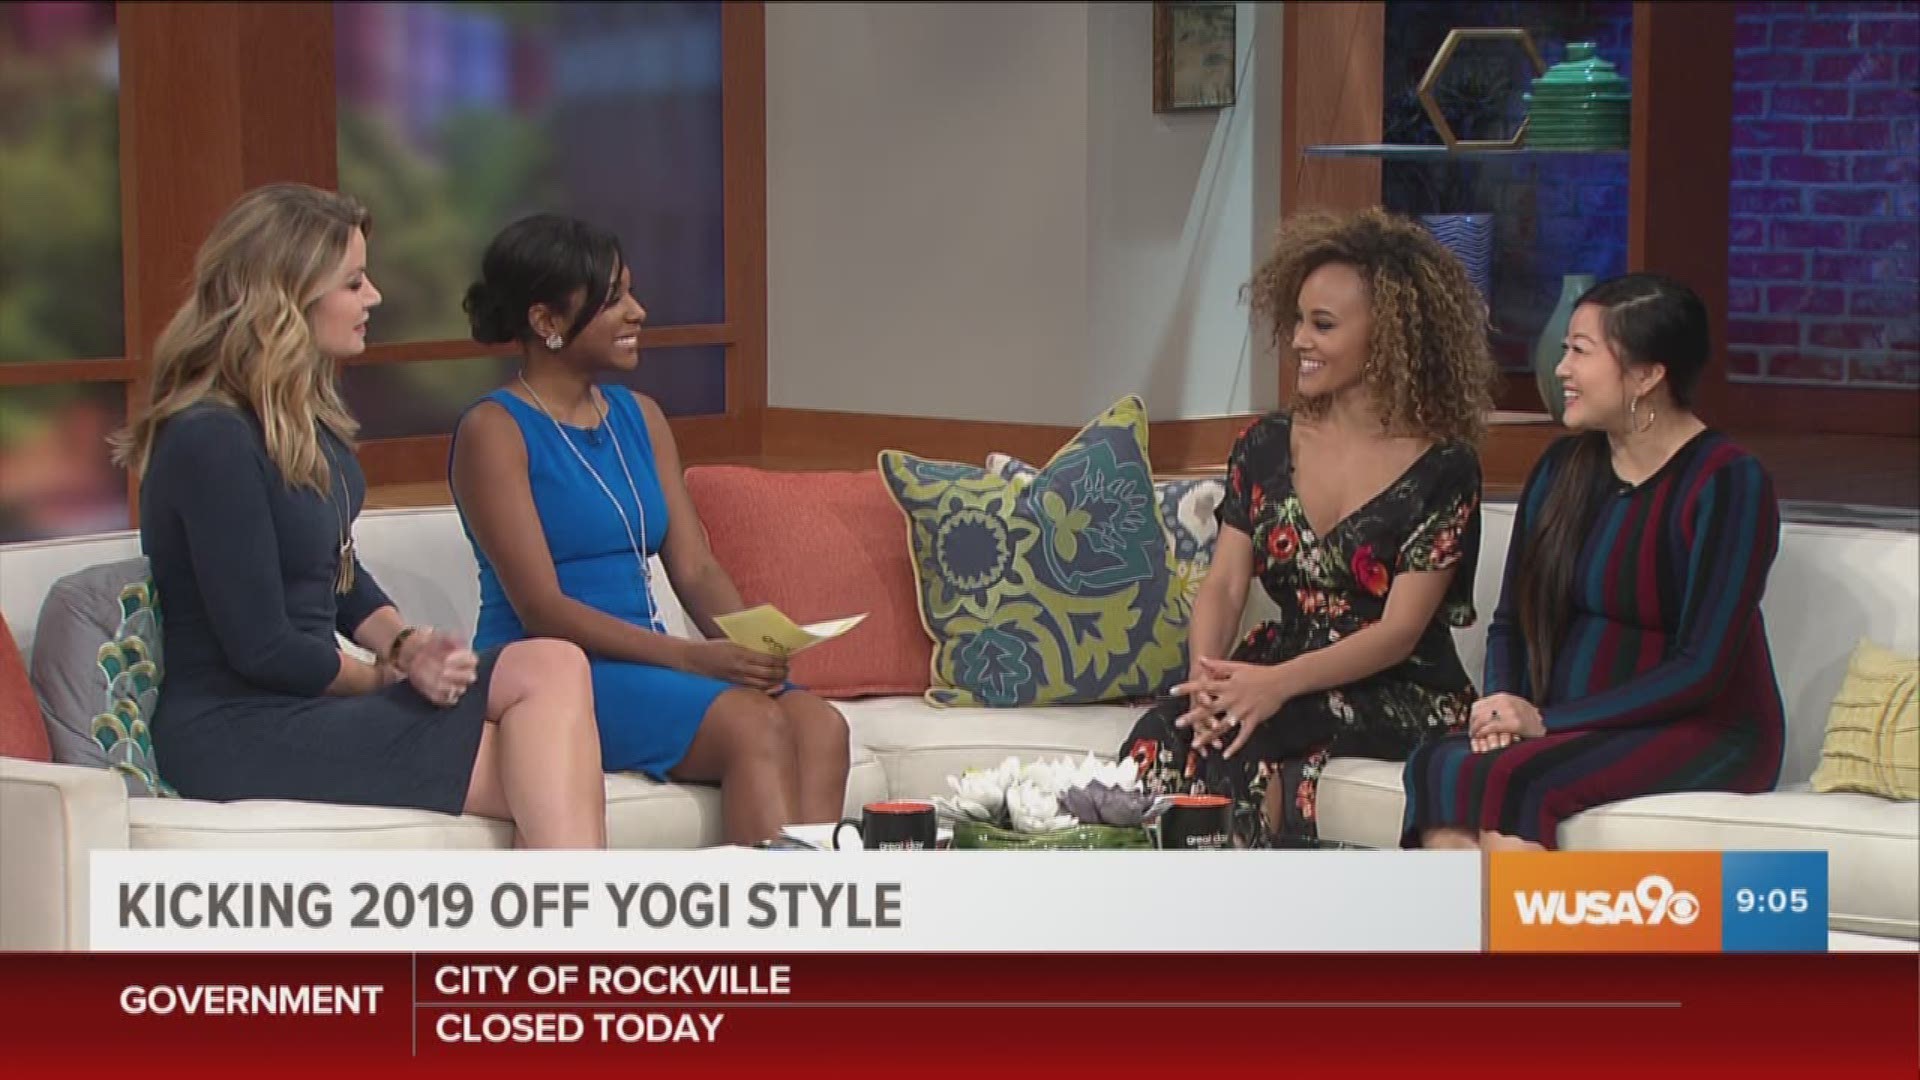 Dreams For Kids DC Executive Director Glenda Smith joined by Ashley Darby from The Real Housewives of Potomac organizes a yoga fitness clinic to start the year off right for kids.